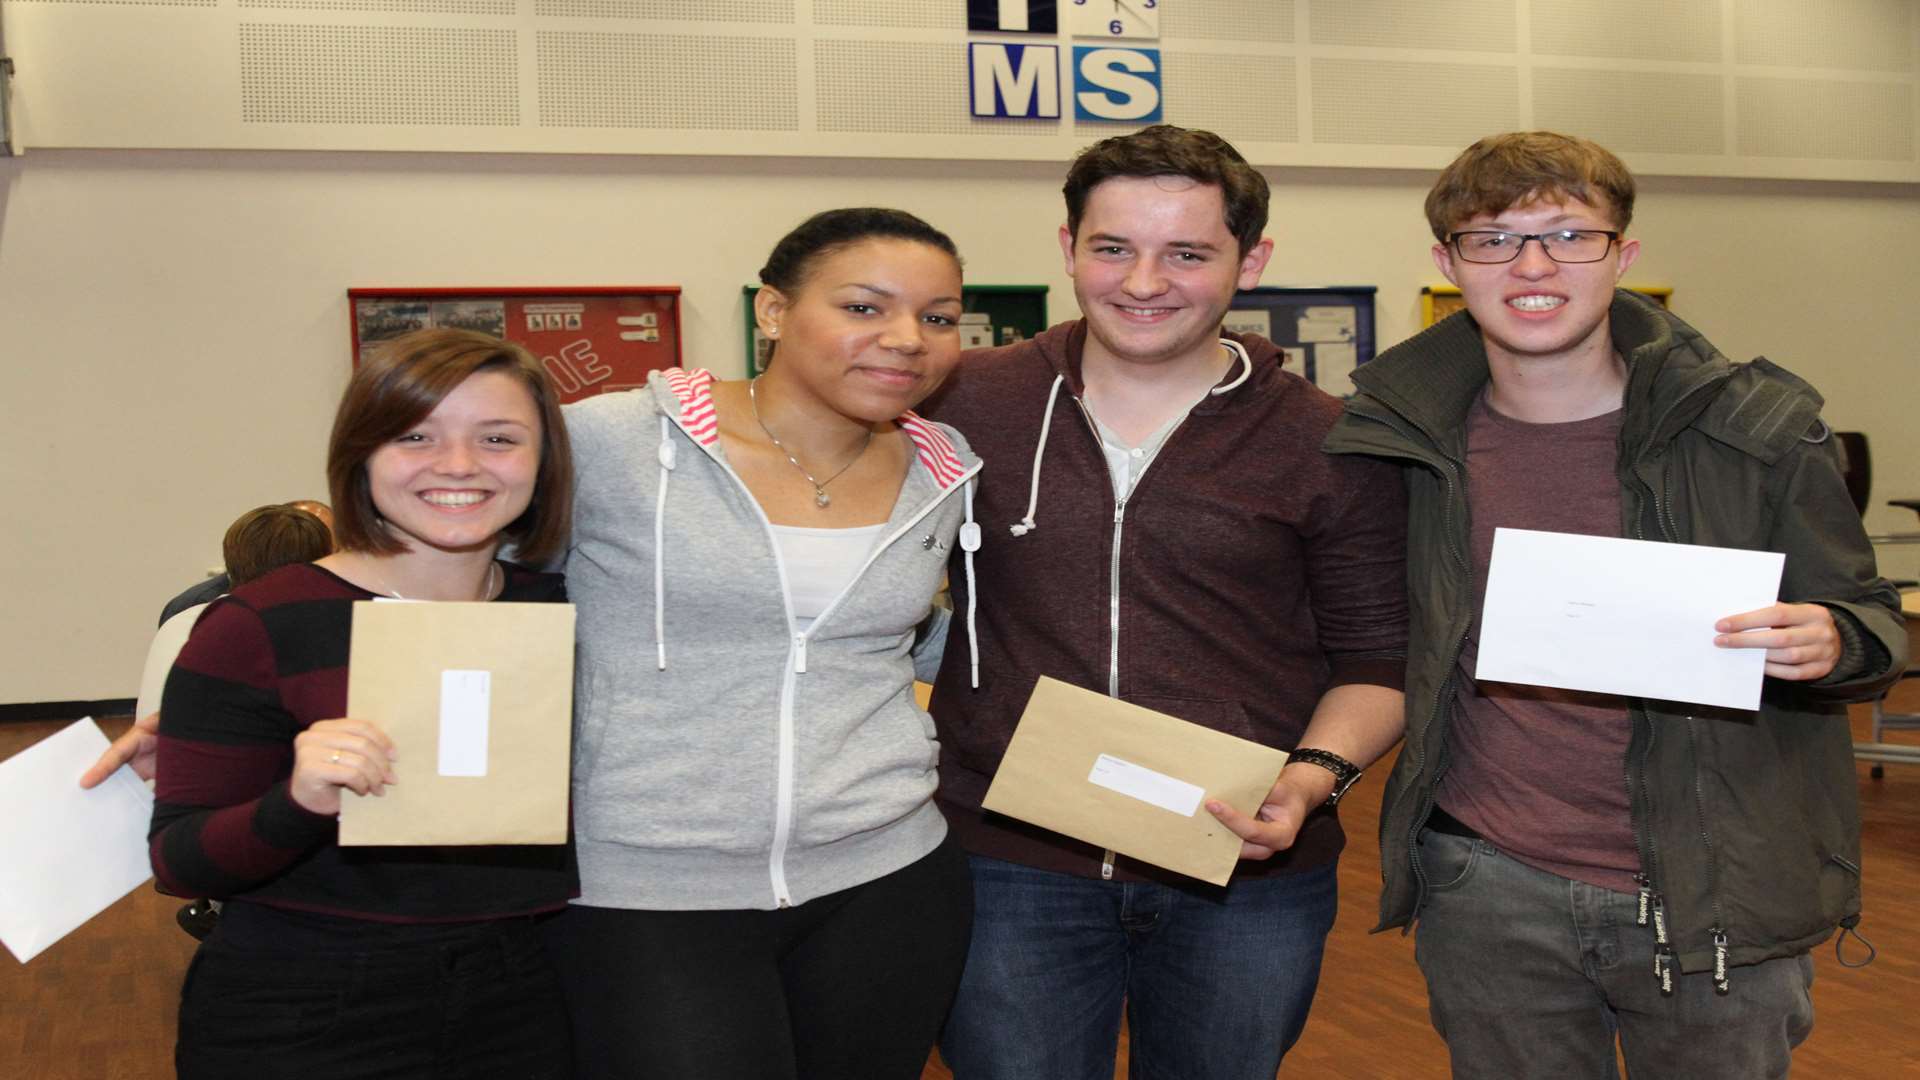 Malling School pupils Jessica Ball, Sophie Bennet, Danny Hogben and Harry Meader with their results